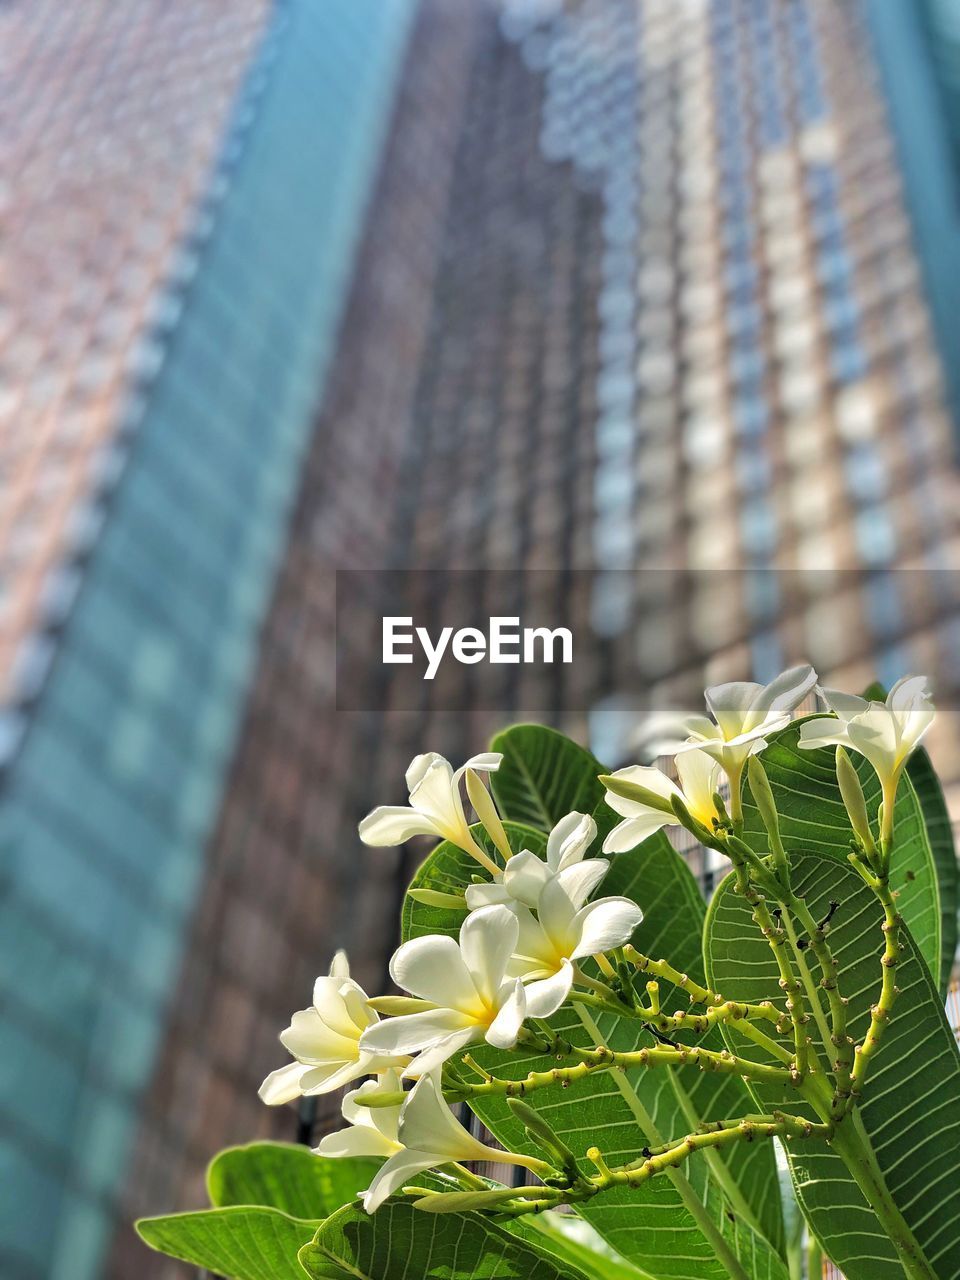 Low angle view of flowering plant against building